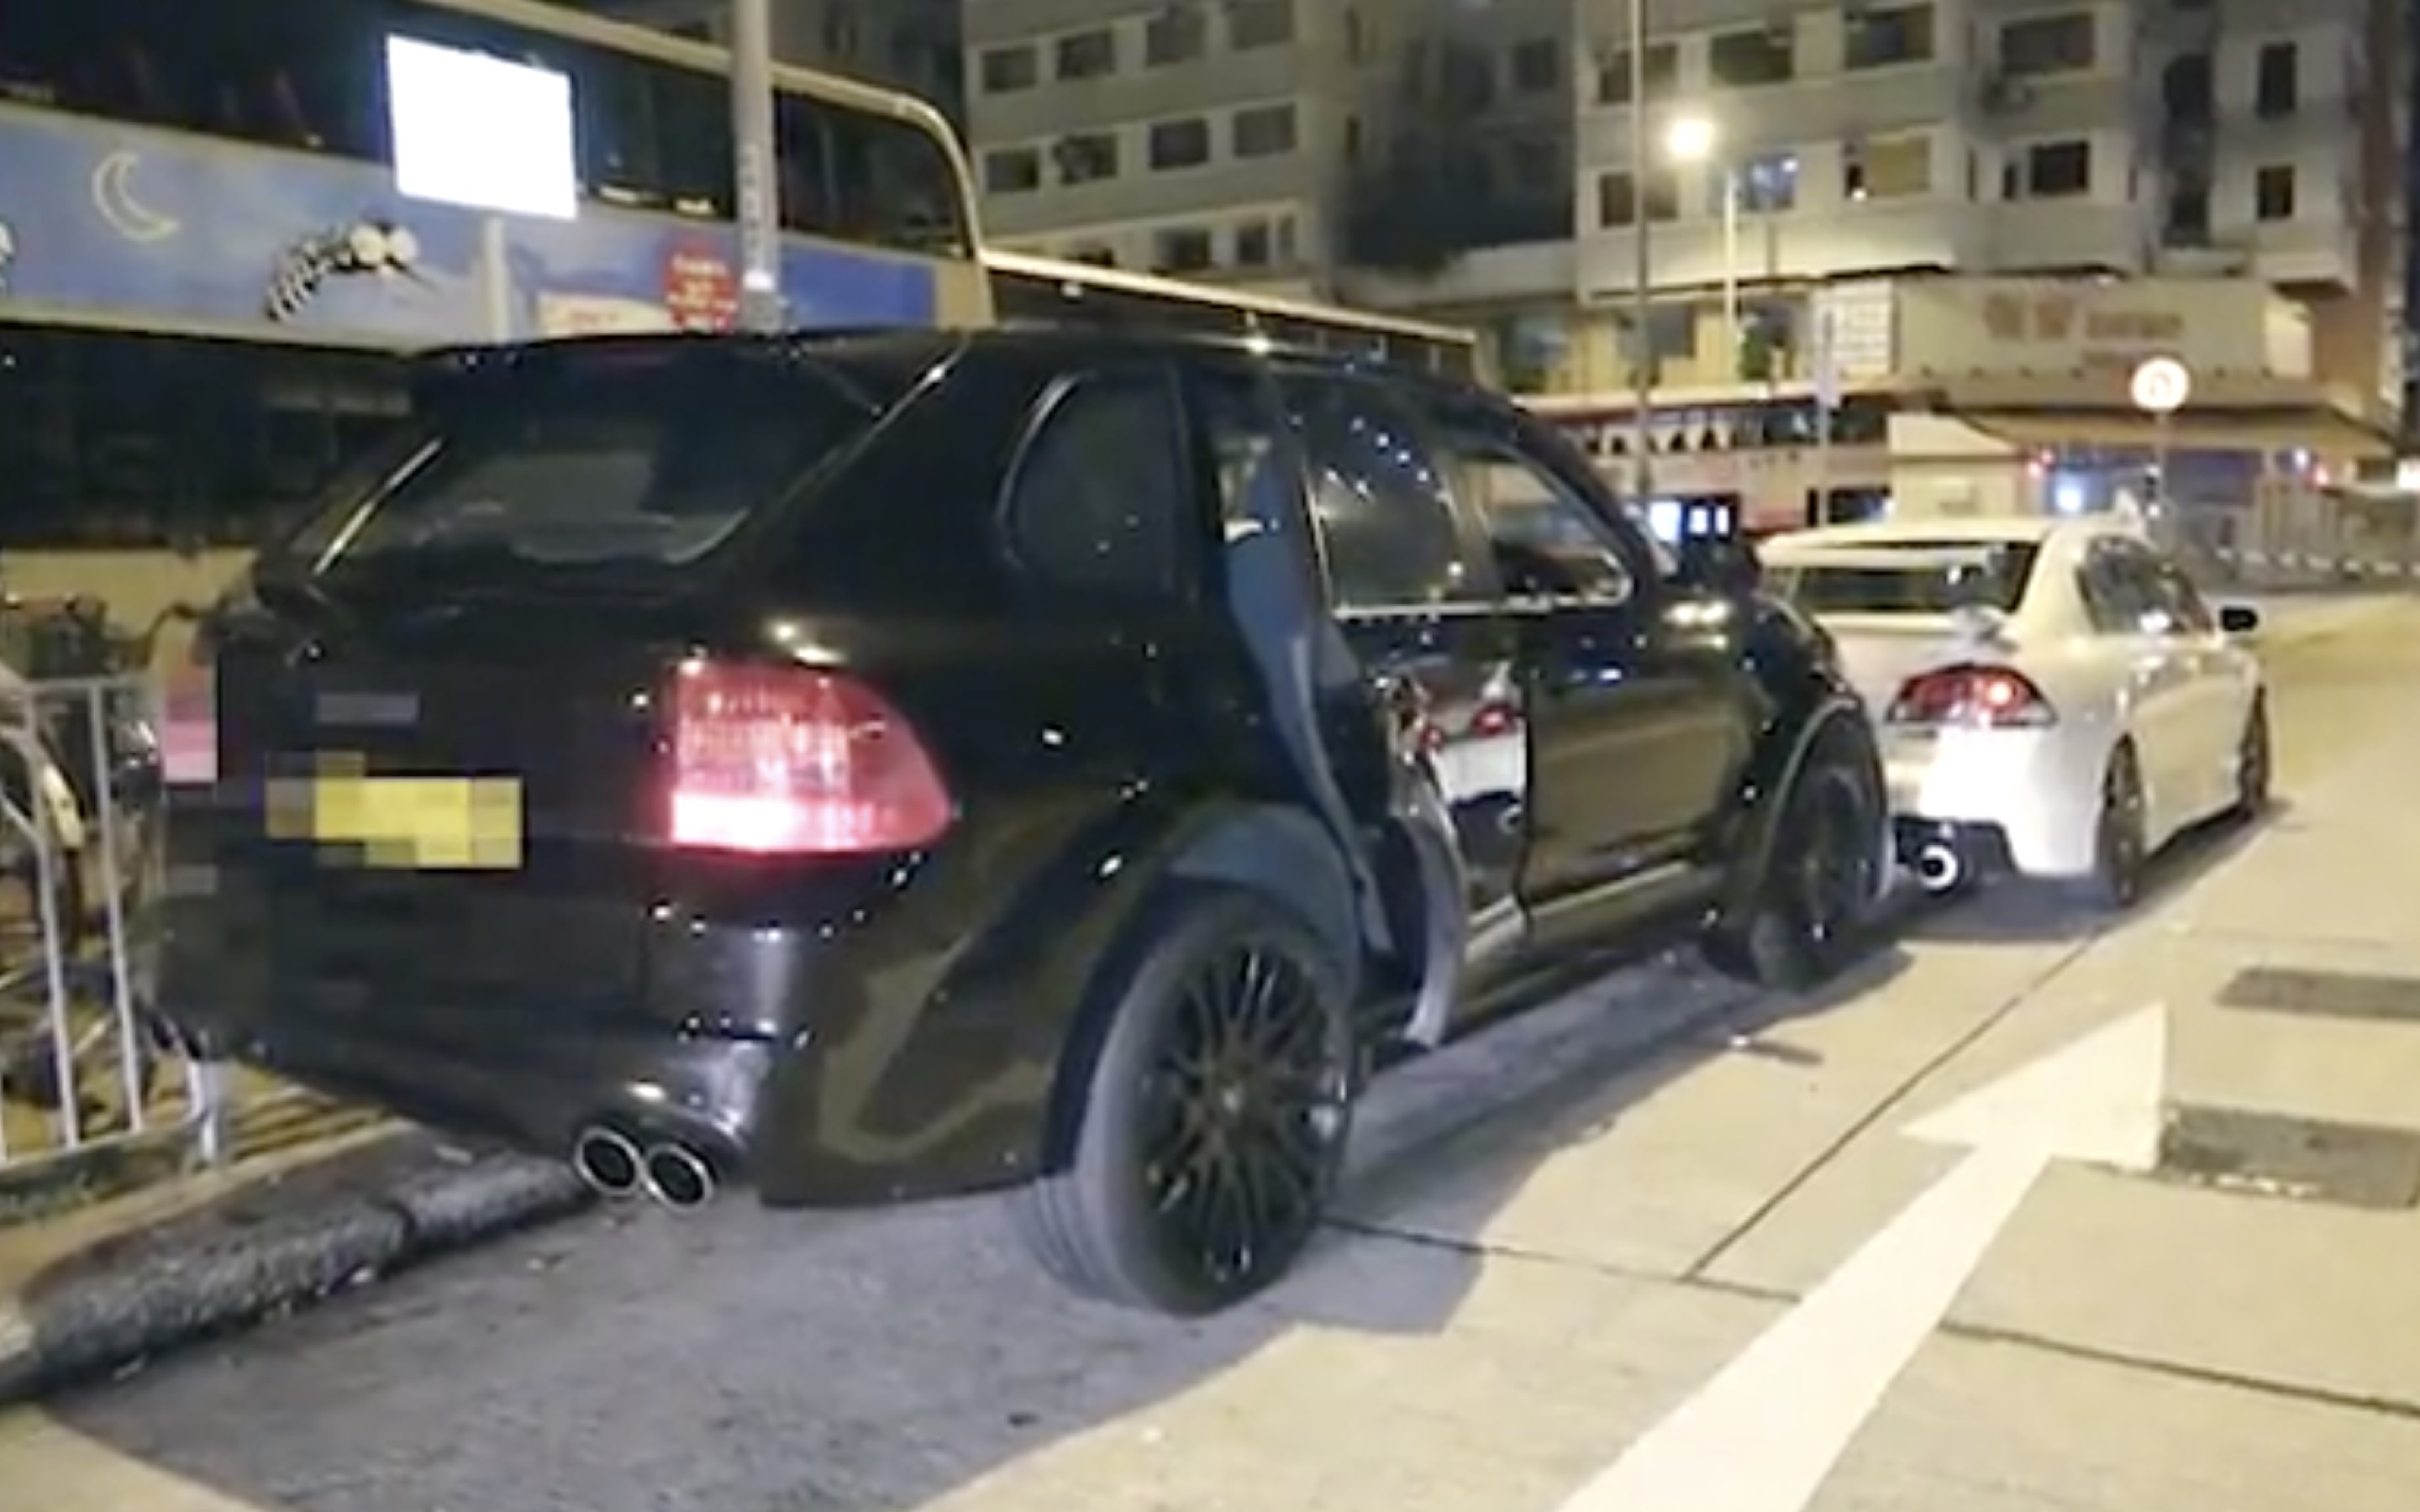 A black four-wheel drive Porsche crashes into the back of a stationary car after the driver led cops on a high-speed chase through Yuen Long. Screengrab via Apple Daily video.